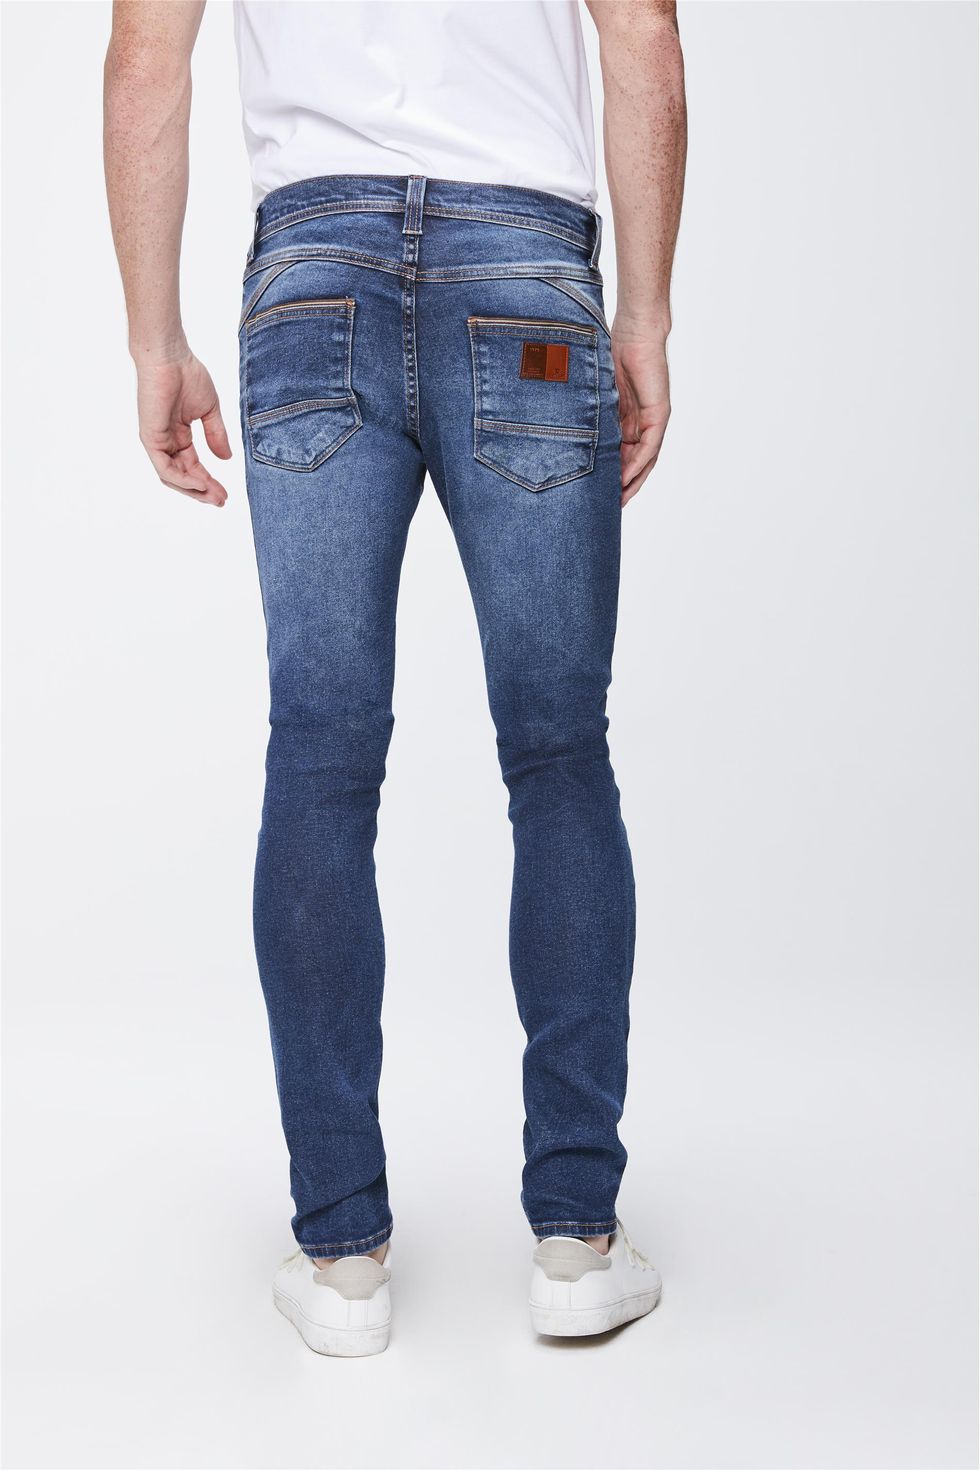 jeans extreme skinny